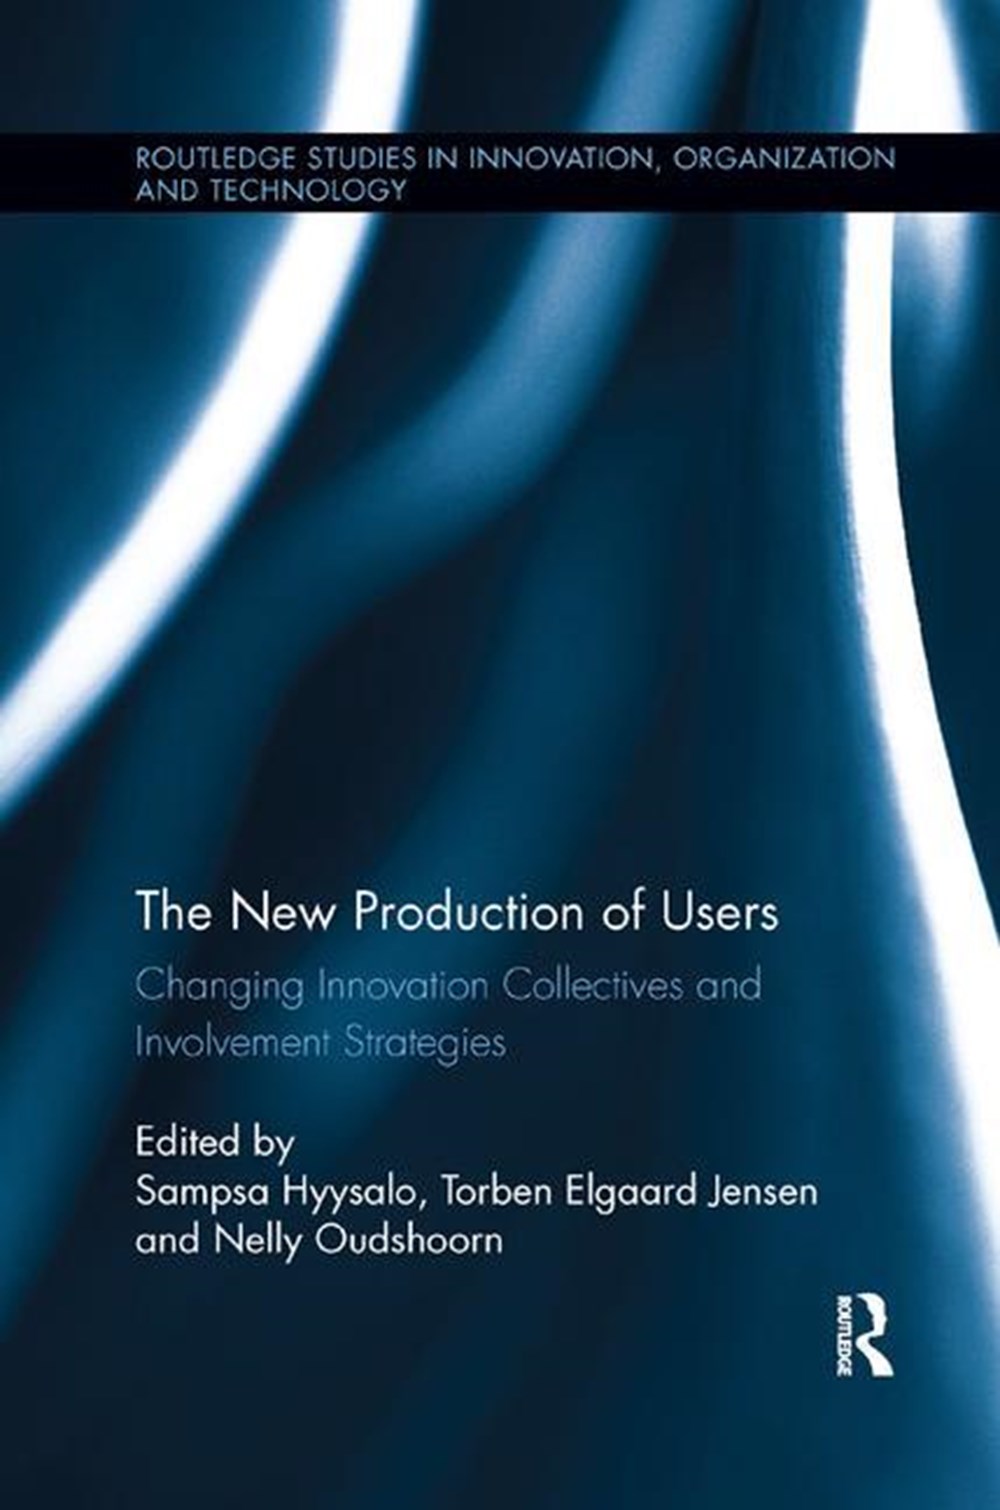 New Production of Users: Changing Innovation Collectives and Involvement Strategies